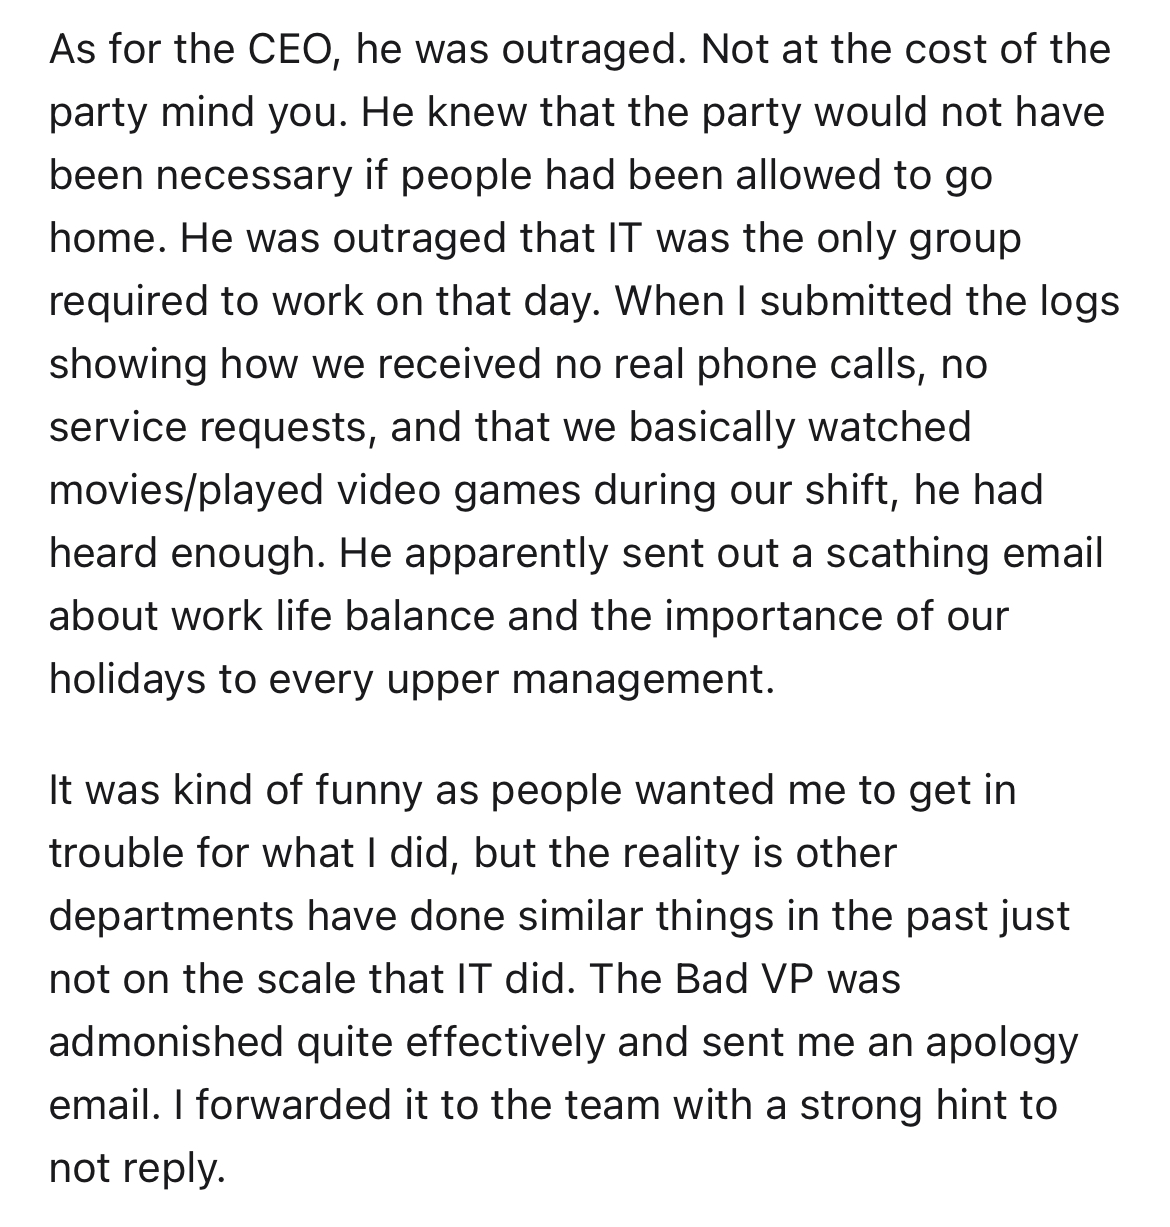 employees throw $6k 4th of July party at work -sirius marauders fanfiction - As for the Ceo, he was outraged. Not at the cost of the party mind you. He knew that the party would not have been necessary if people had been allowed to go home. He was outrage